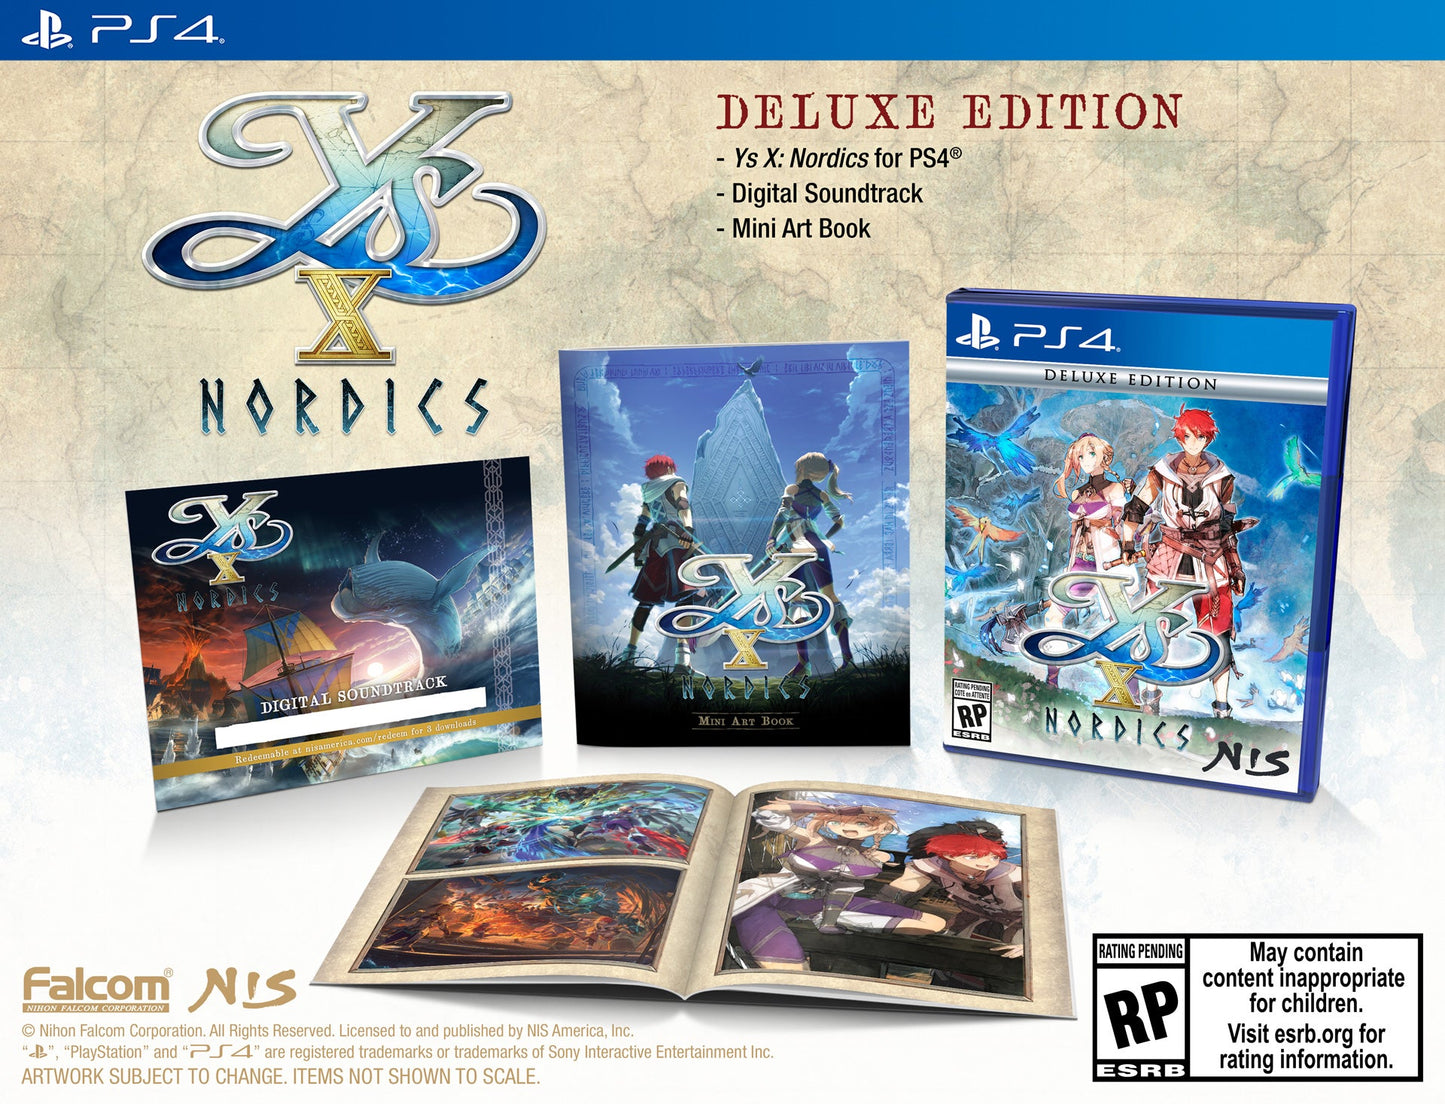 Ys X: Nordics - Deluxe Edition - PS4 [FREE SHIPPING]